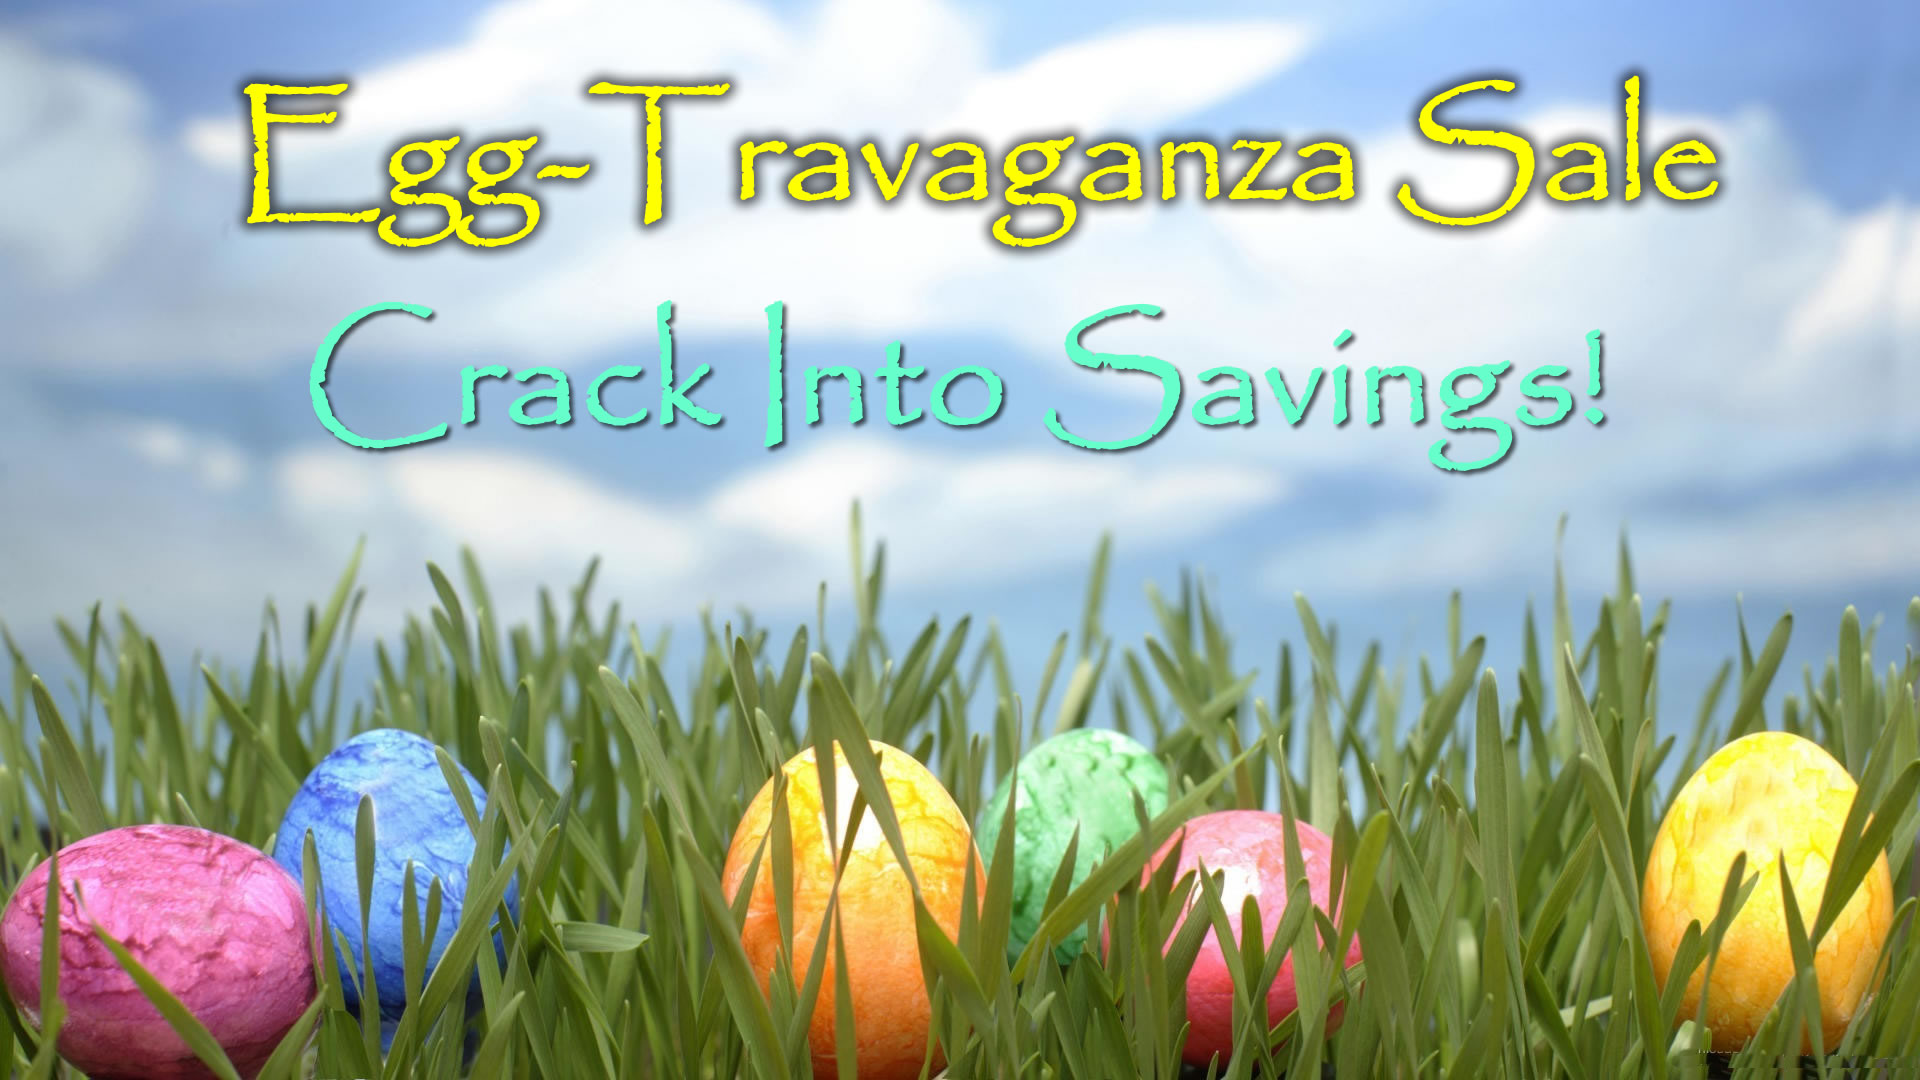 Our 2 Day Easter Egg-Travaganza Sale